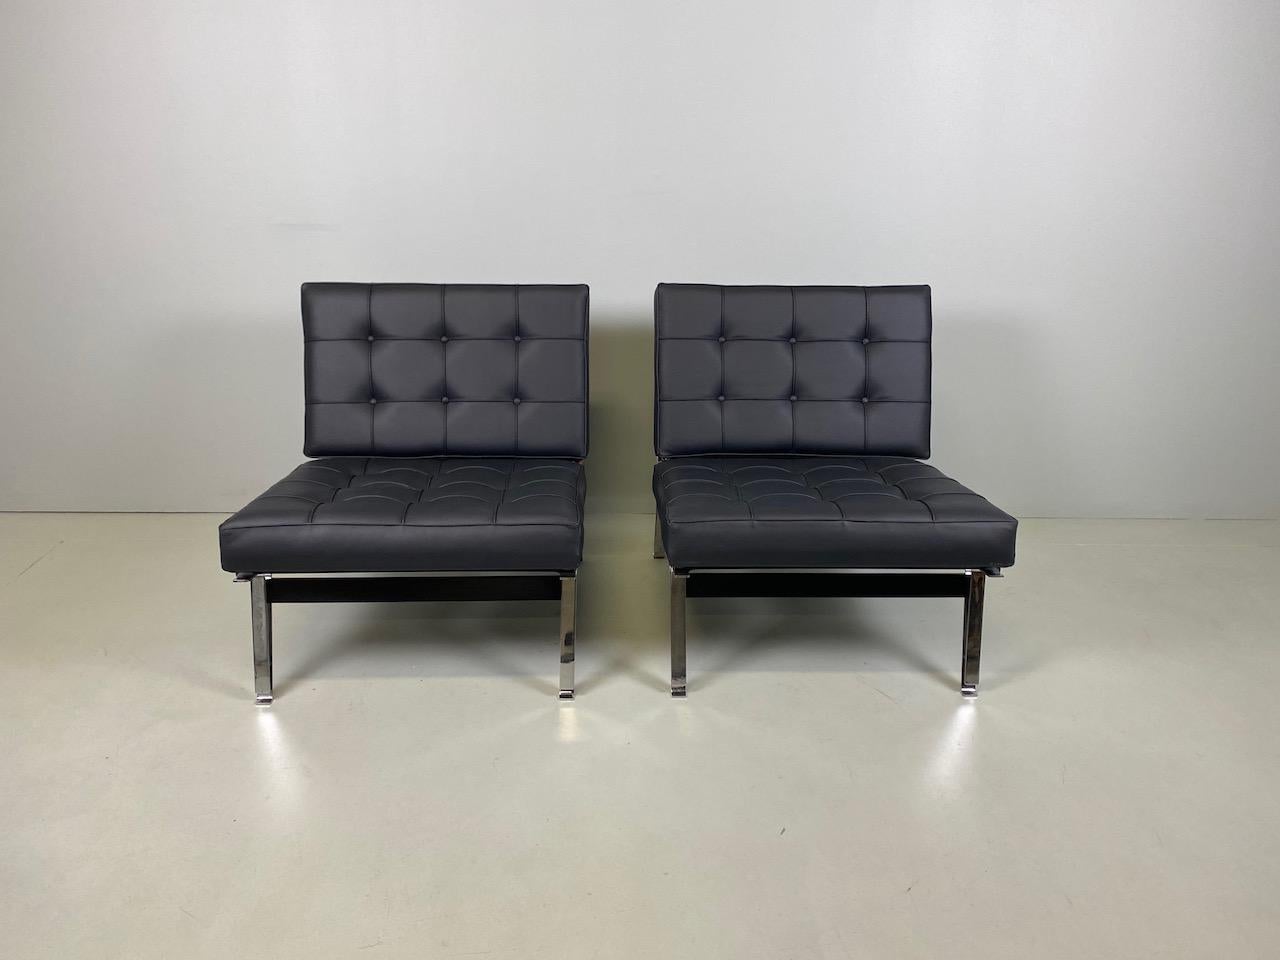 Important pair of original 1957 Ico Parisi “856” lounge chairs finished in high quality leather, manufactured by Cassina, Meda (Milan), Italy.
Beautiful design with sculptural form super lightweight bent chromed steel frame with solid black walnut